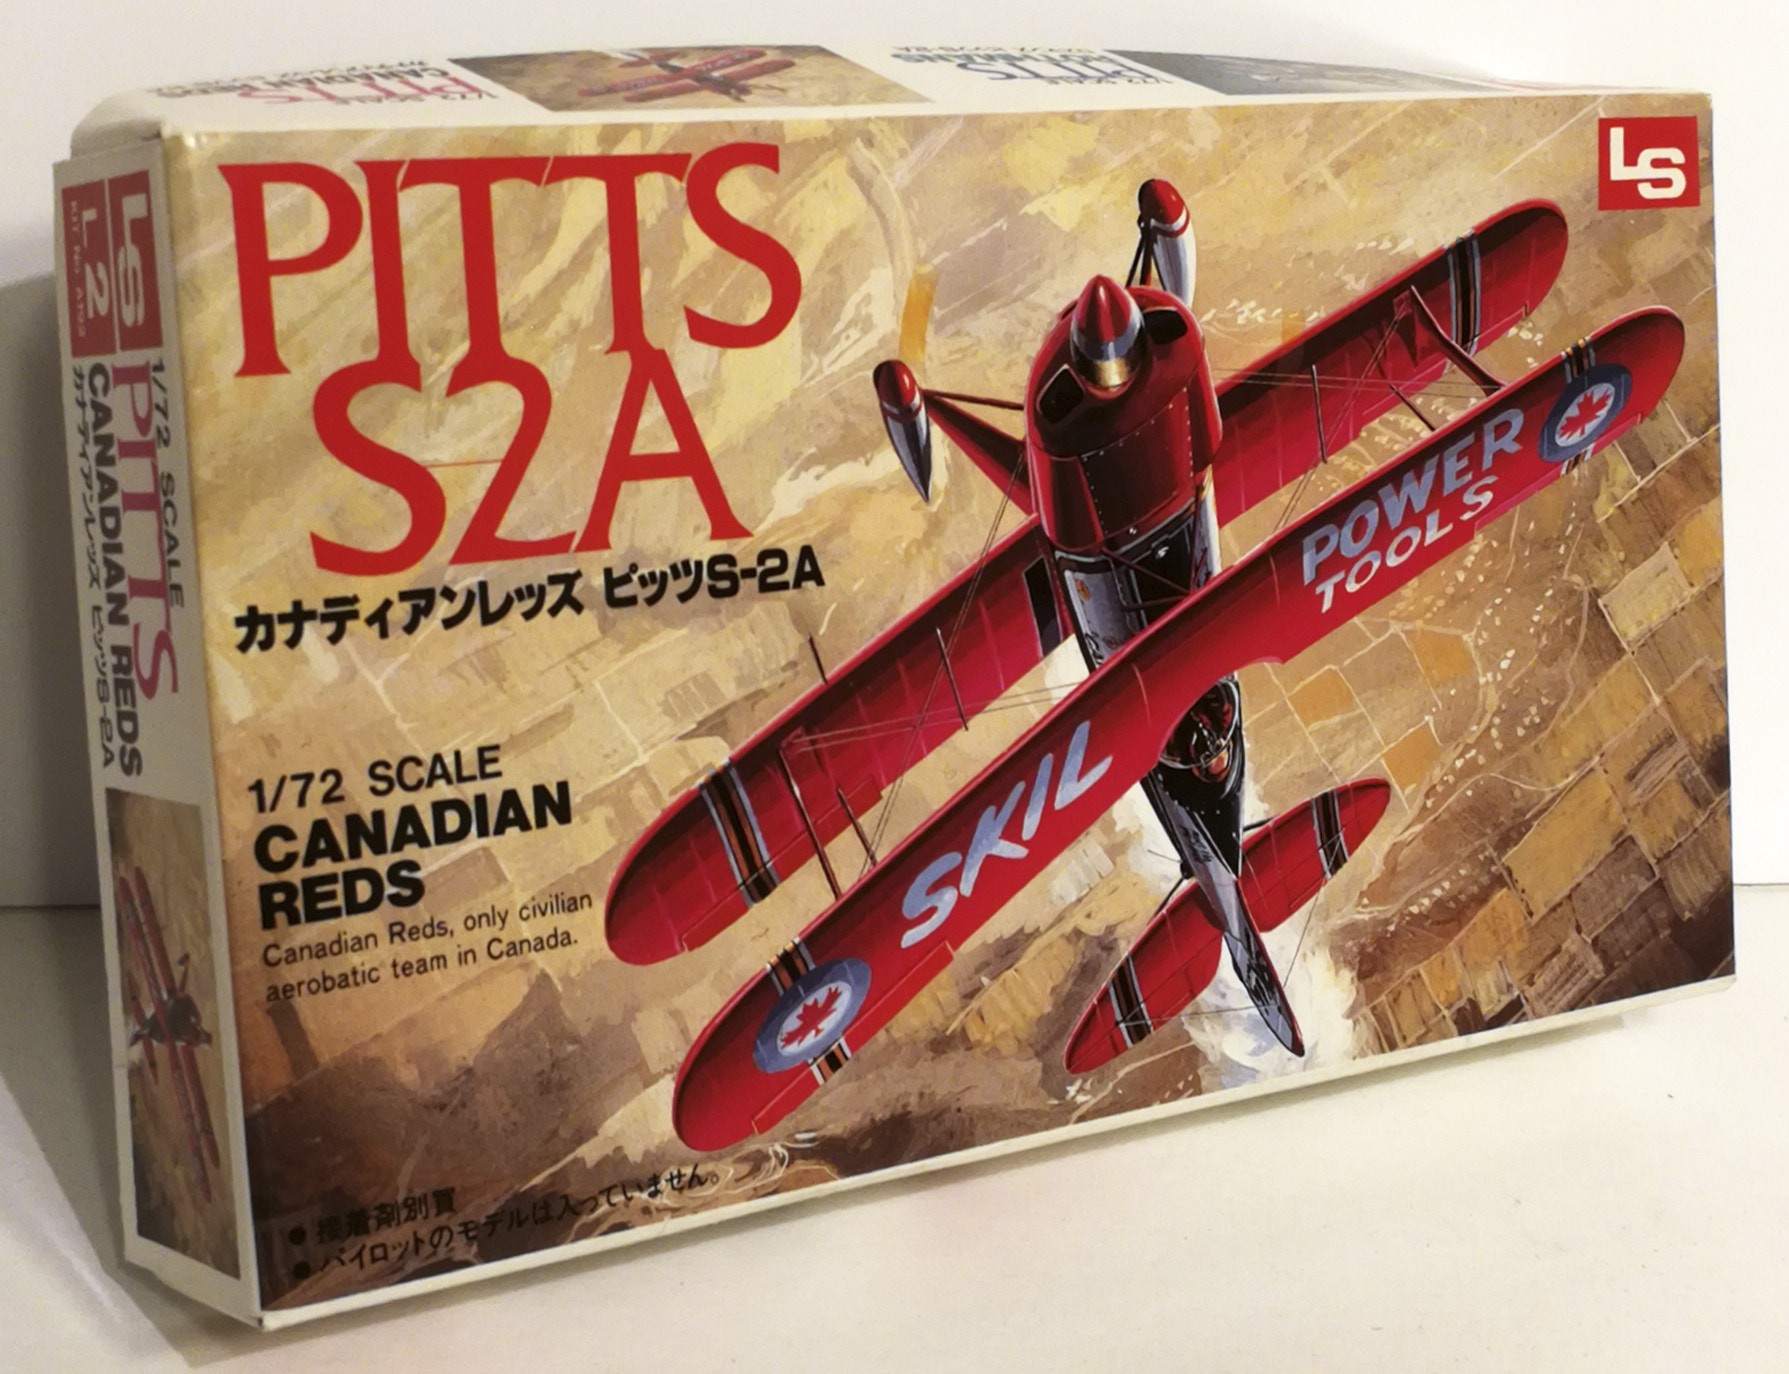 Pitts S2A Canadian Reds SEALED BAG